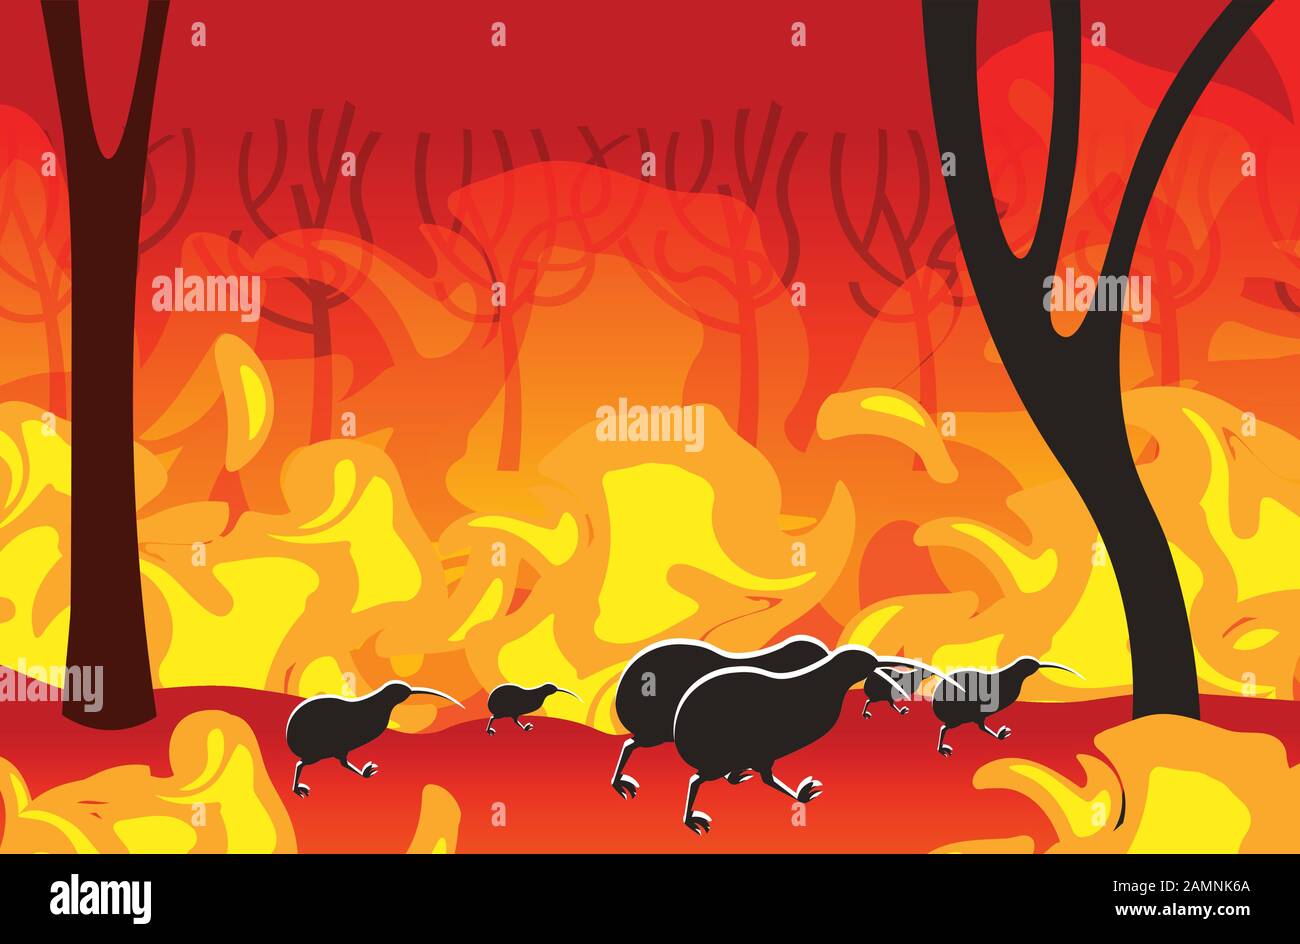 kiwi silhouettes running from forest fires in australia animals dying in wildfire bushfire burning trees natural disaster concept intense orange flames horizontal vector illustration Stock Vector